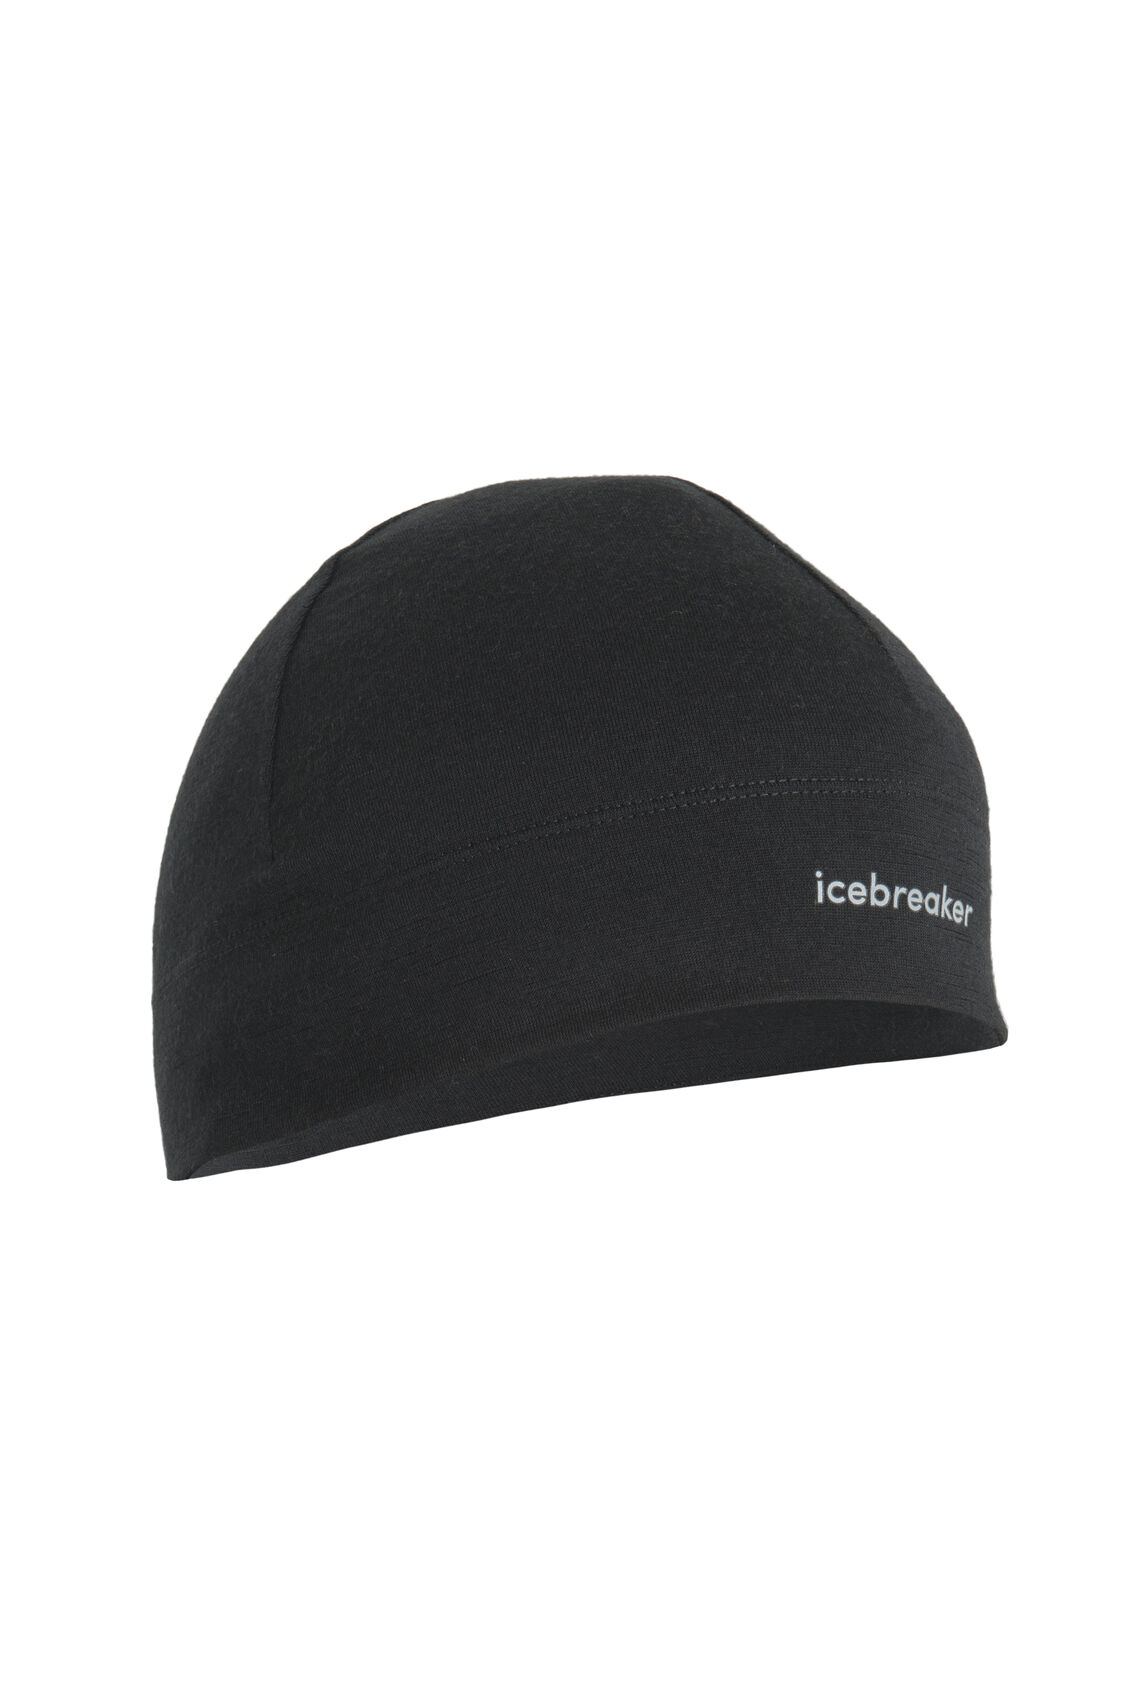 Unisex Merino 200 Oasis Beanie A midweight merino wool hat for running, hiking and active winter days made with our best-selling jersey merino fabric, the 200 Oasis Beanie insulates and breathes when youre on the move.